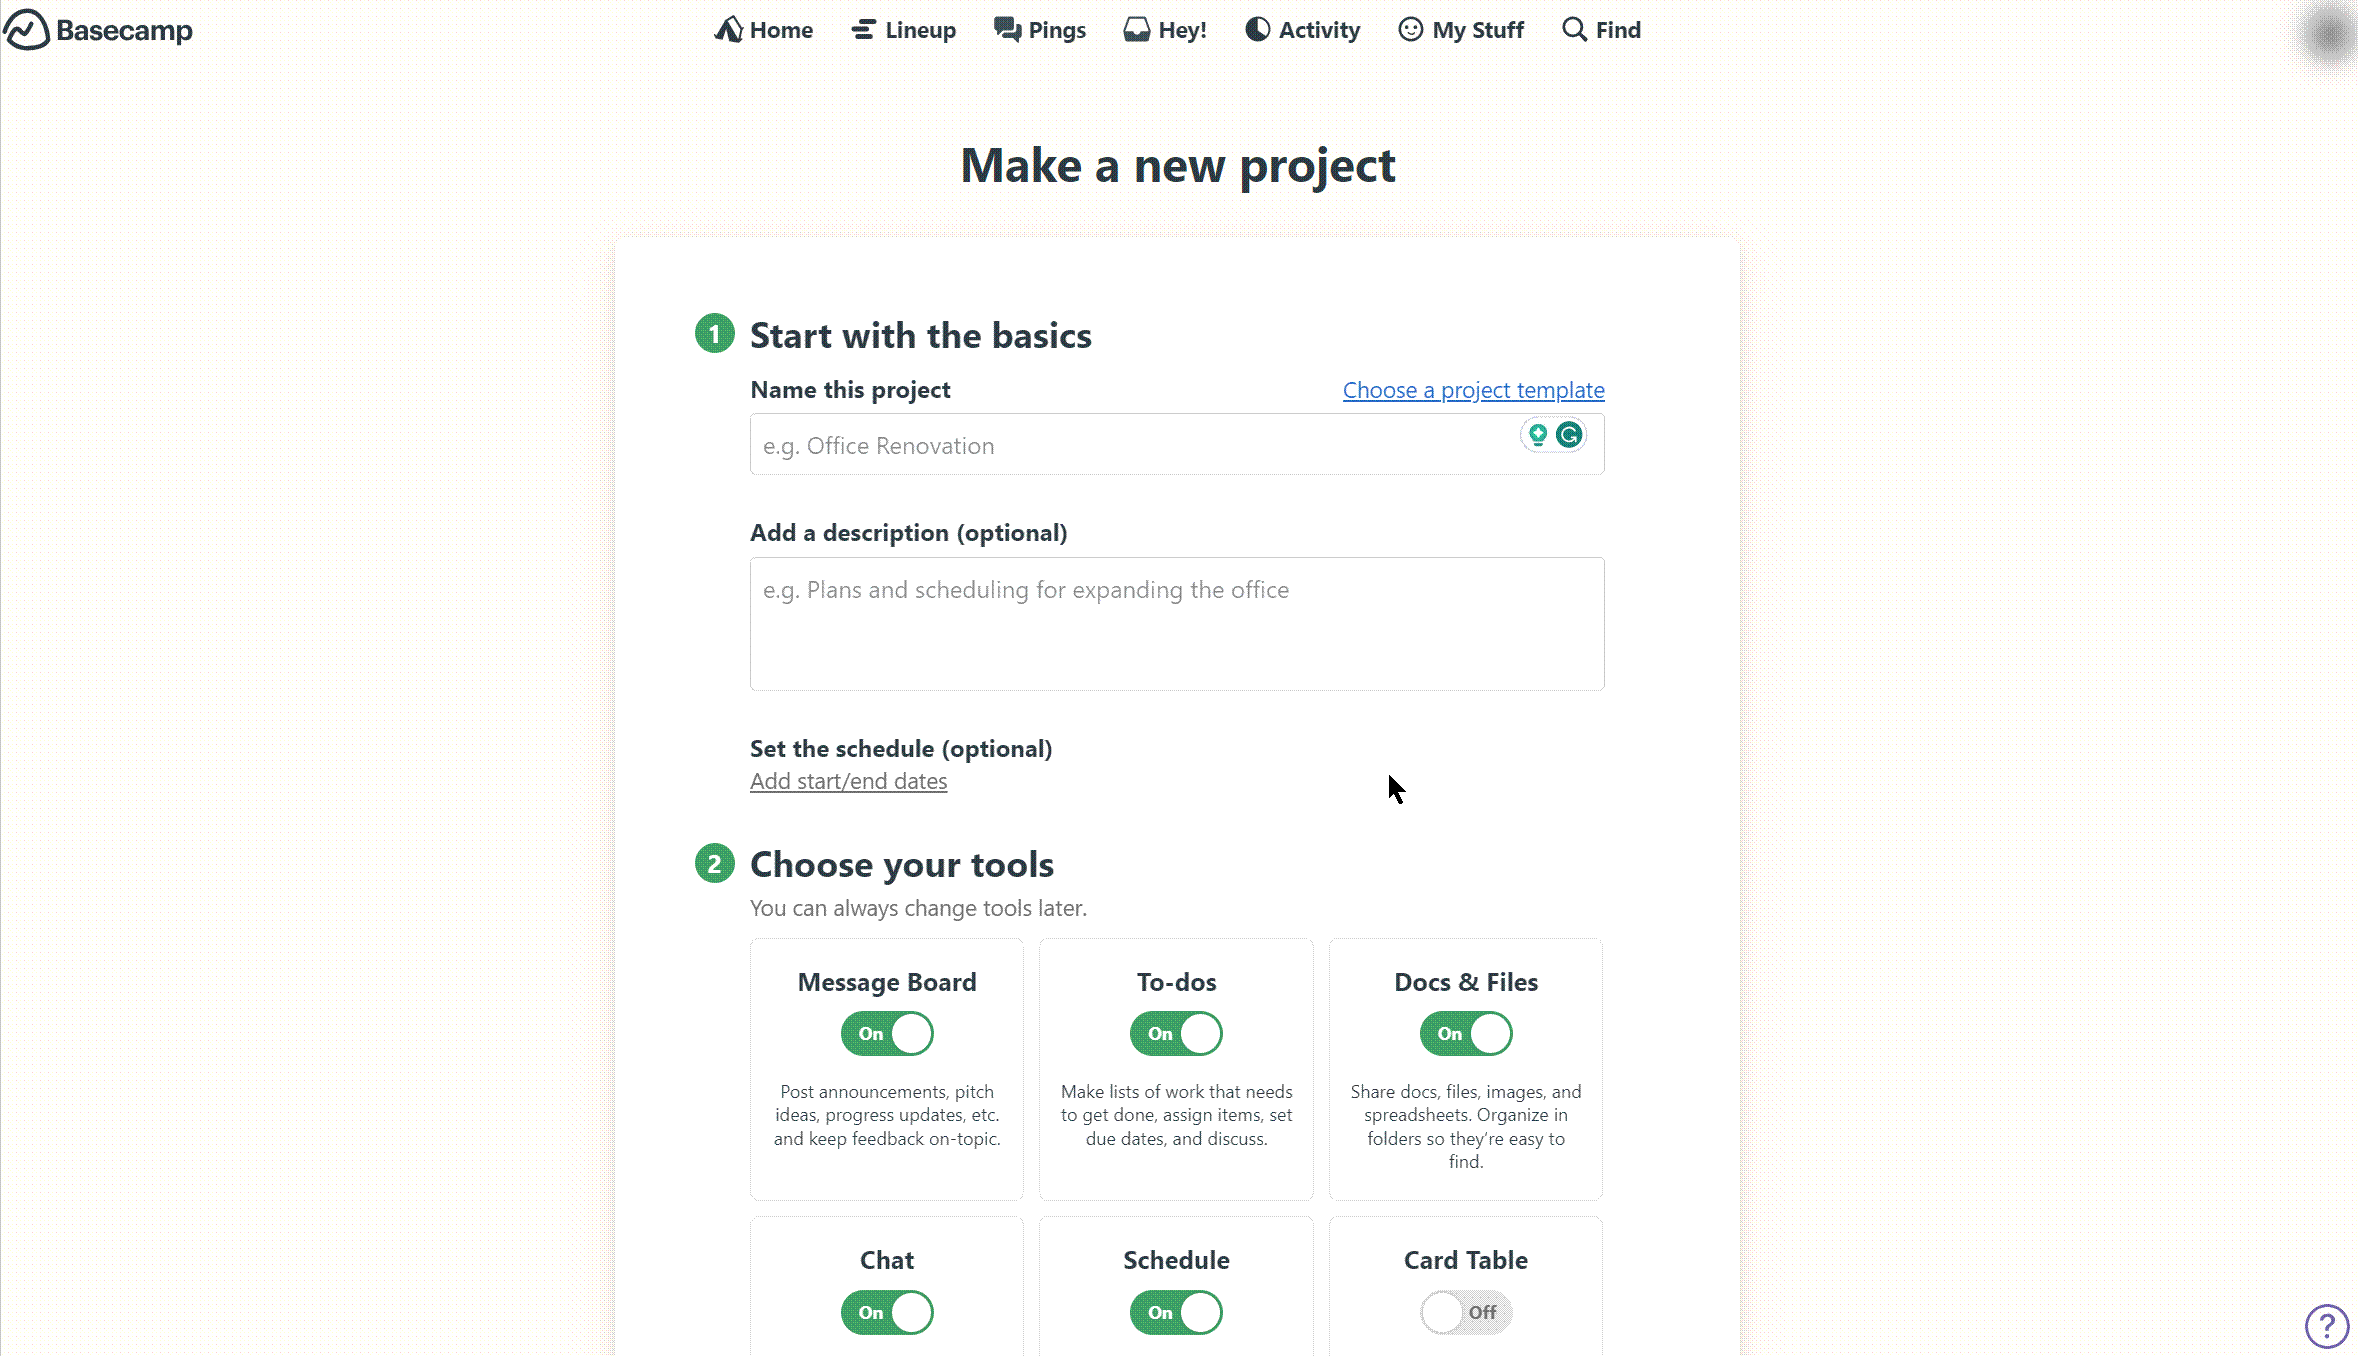 Recensione Basecamp - Make a new project